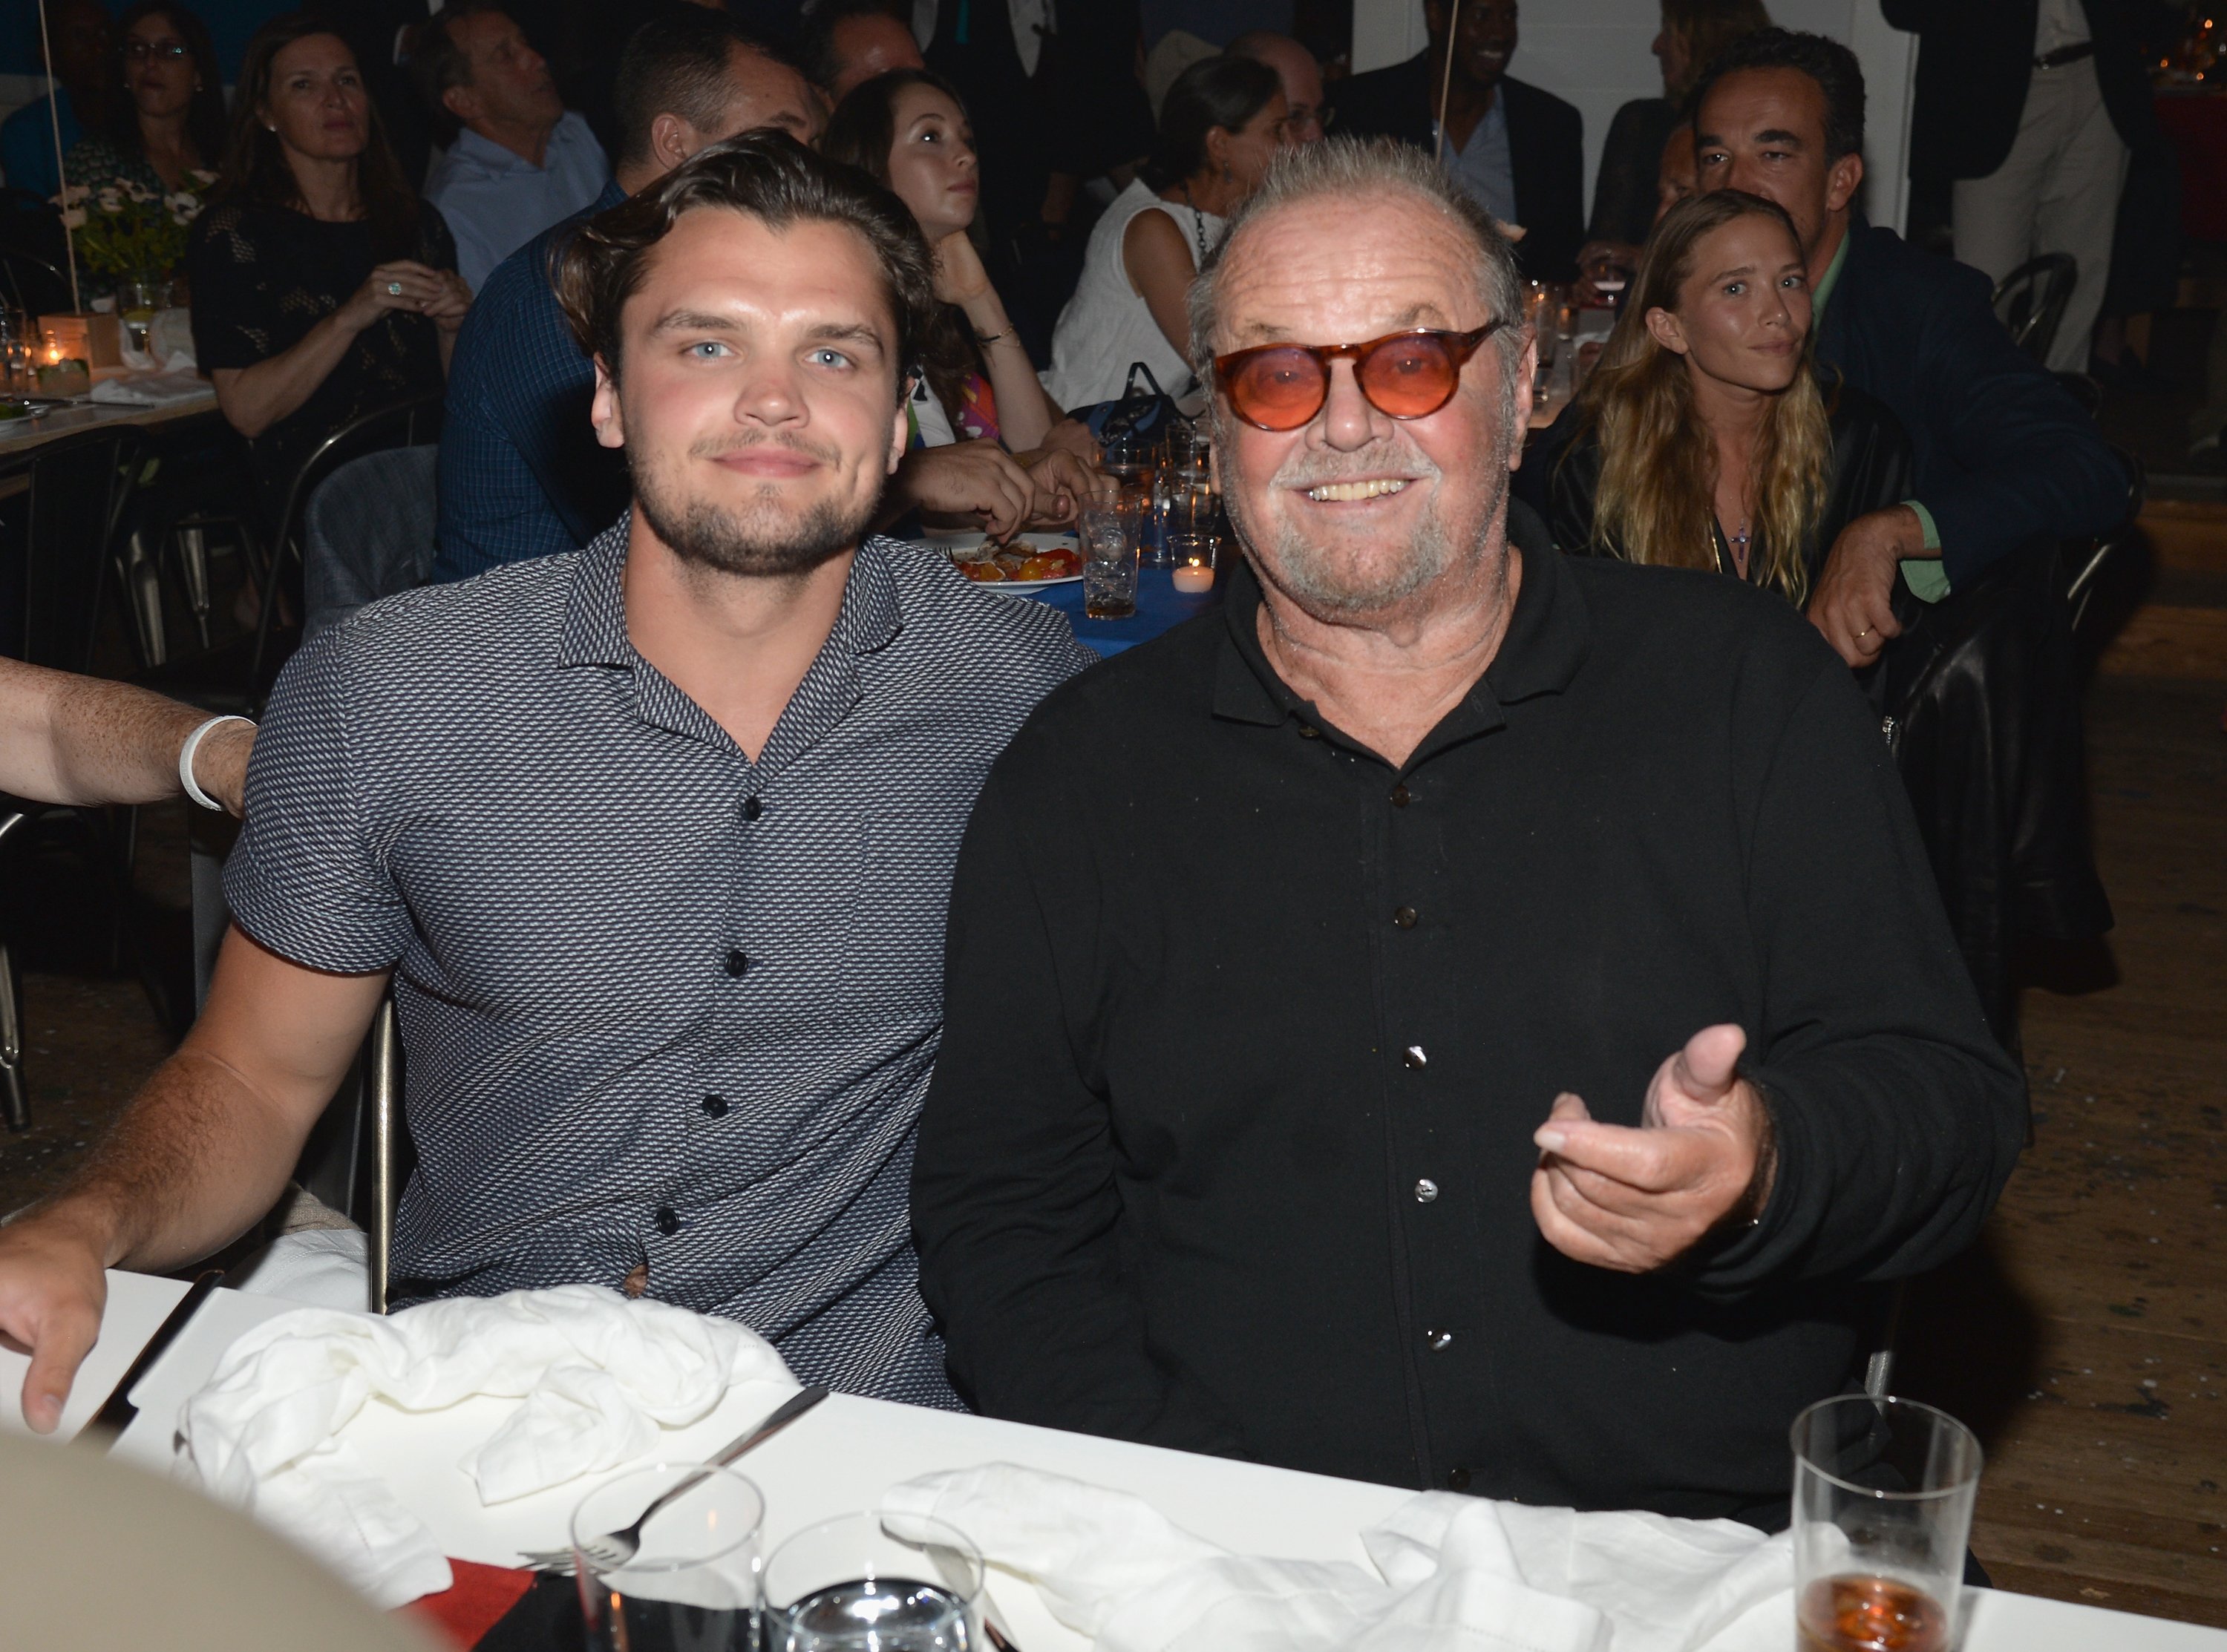 Ray Nicholson and Jack Nicholson pictured at the Apollo in the Hamptons 2015 at The Creeks, New York. | Photo: Getty Images 